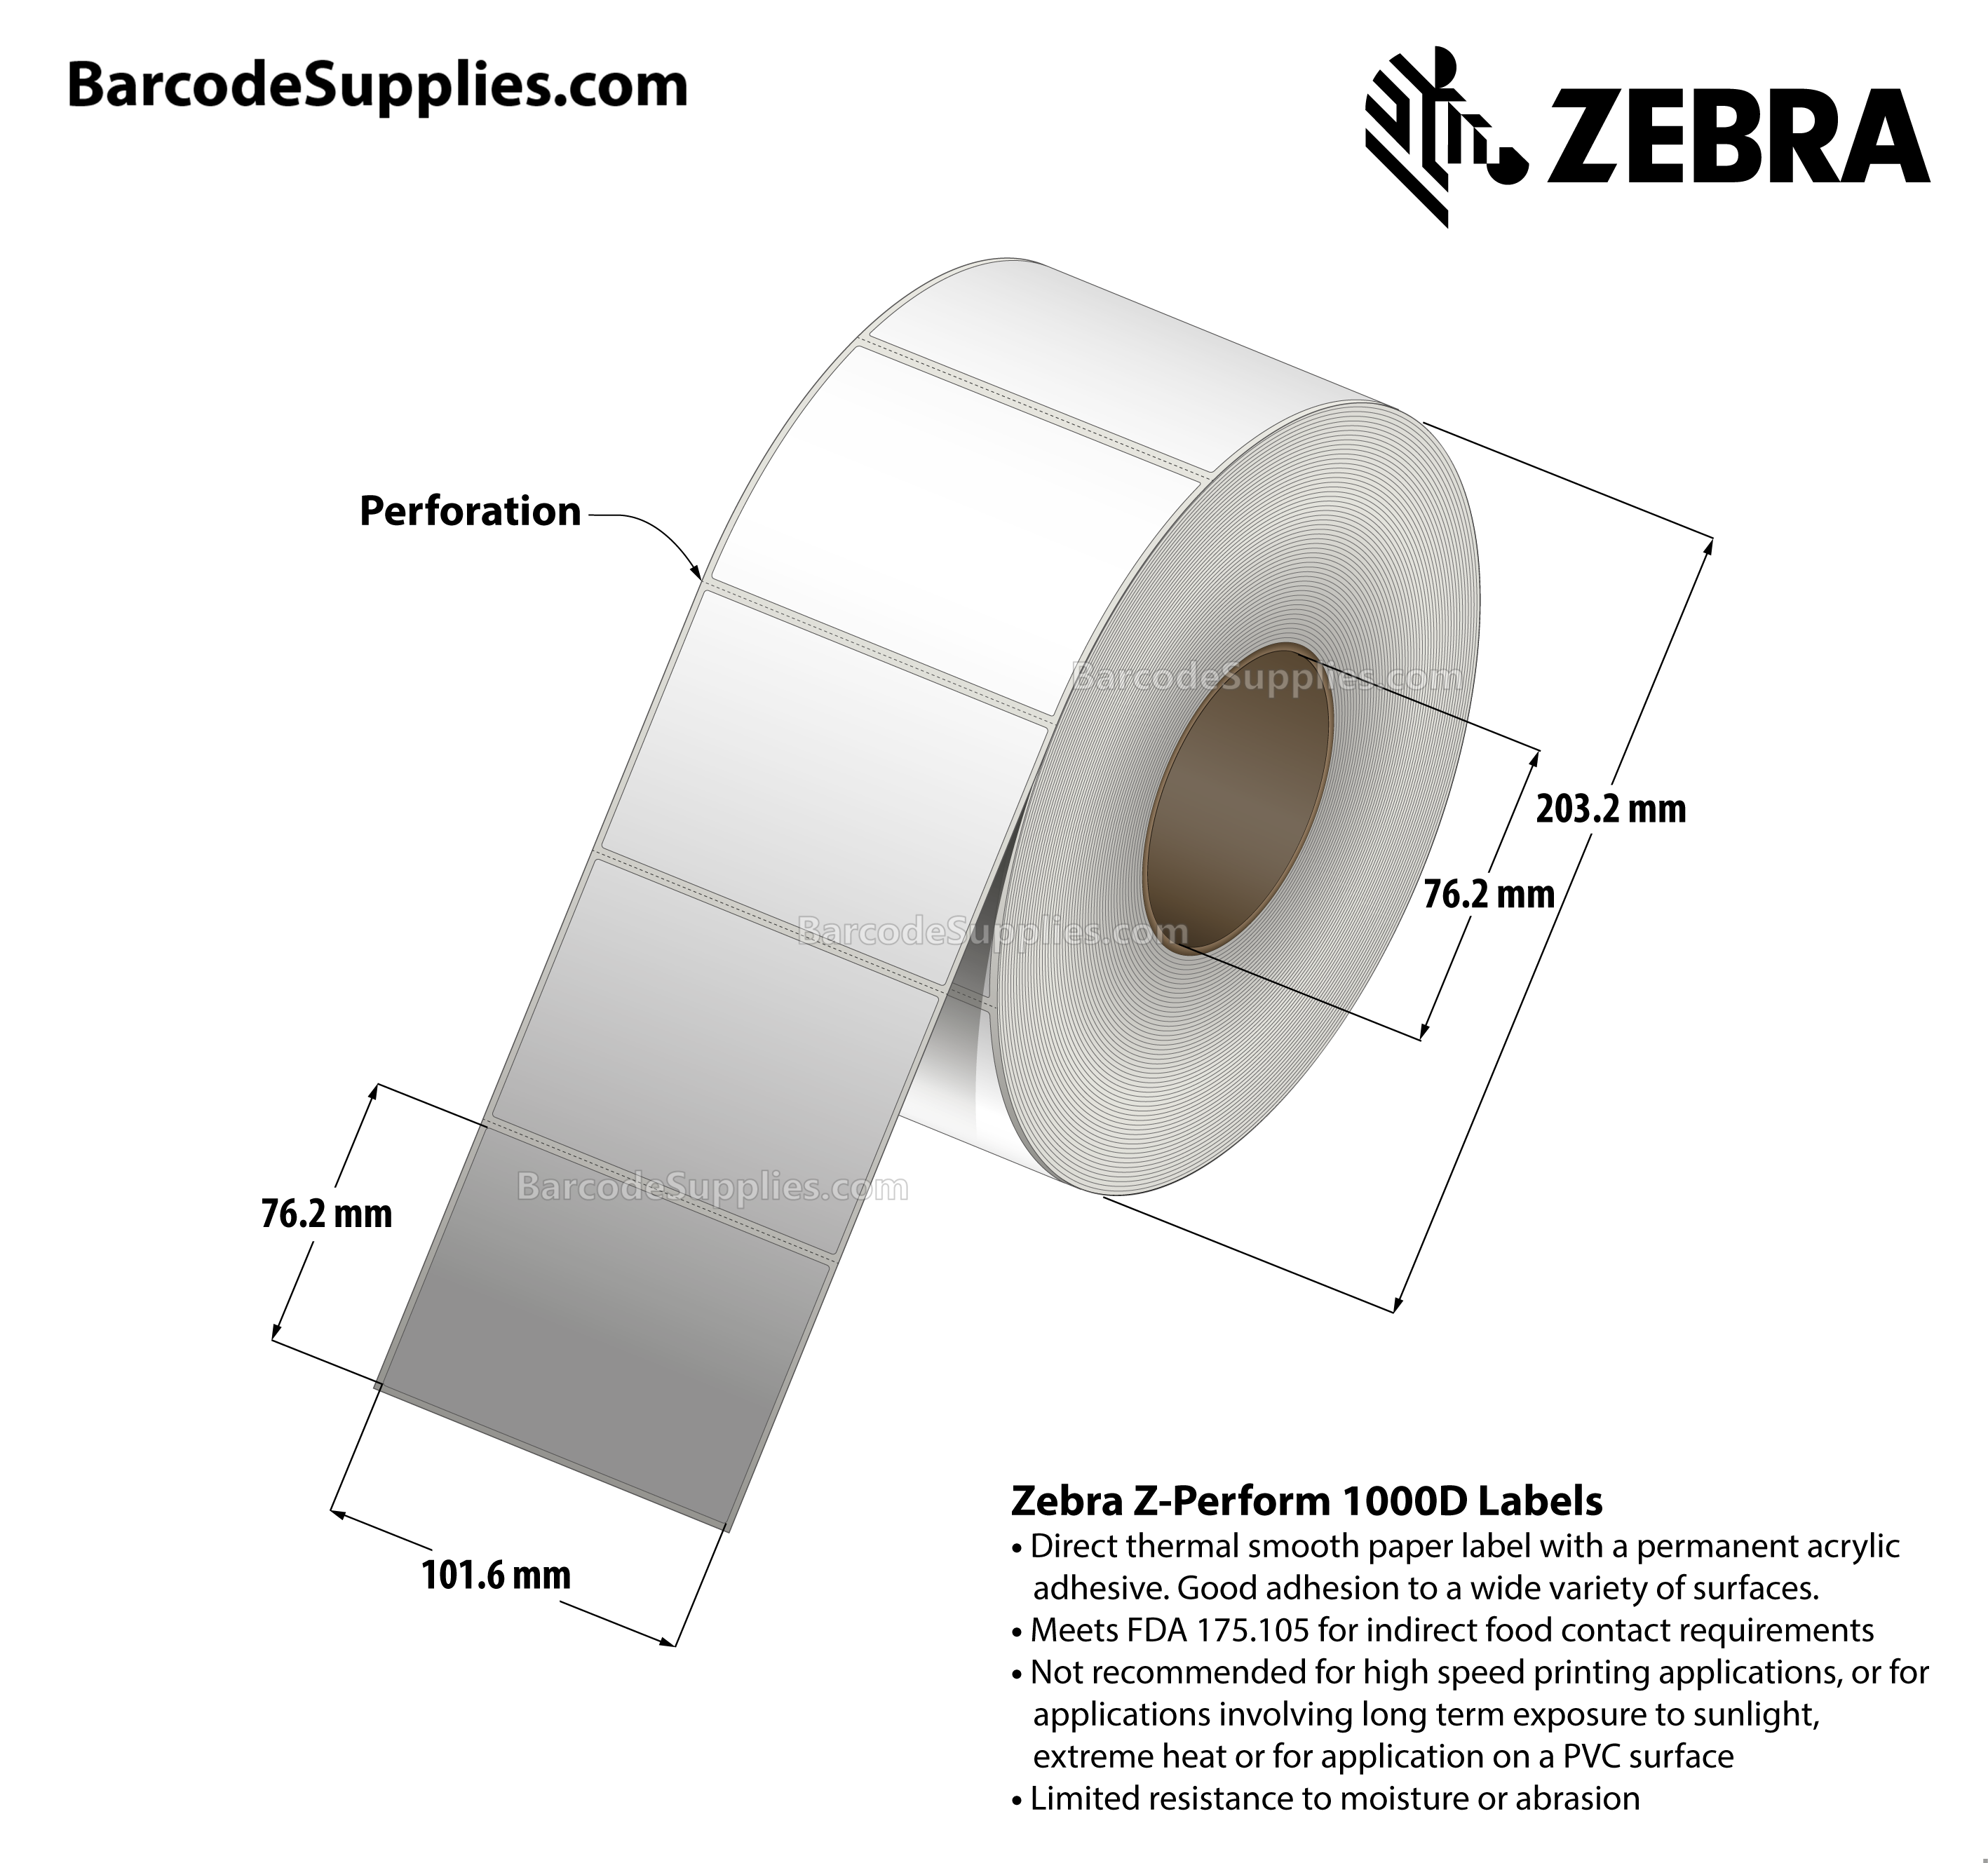 Products 4 x 3 Direct Thermal White Z-Perform 1000D Labels With Permanent Adhesive - Perforated - 2000 Labels Per Roll - Carton Of 4 Rolls - 8000 Labels Total - MPN: 10000302